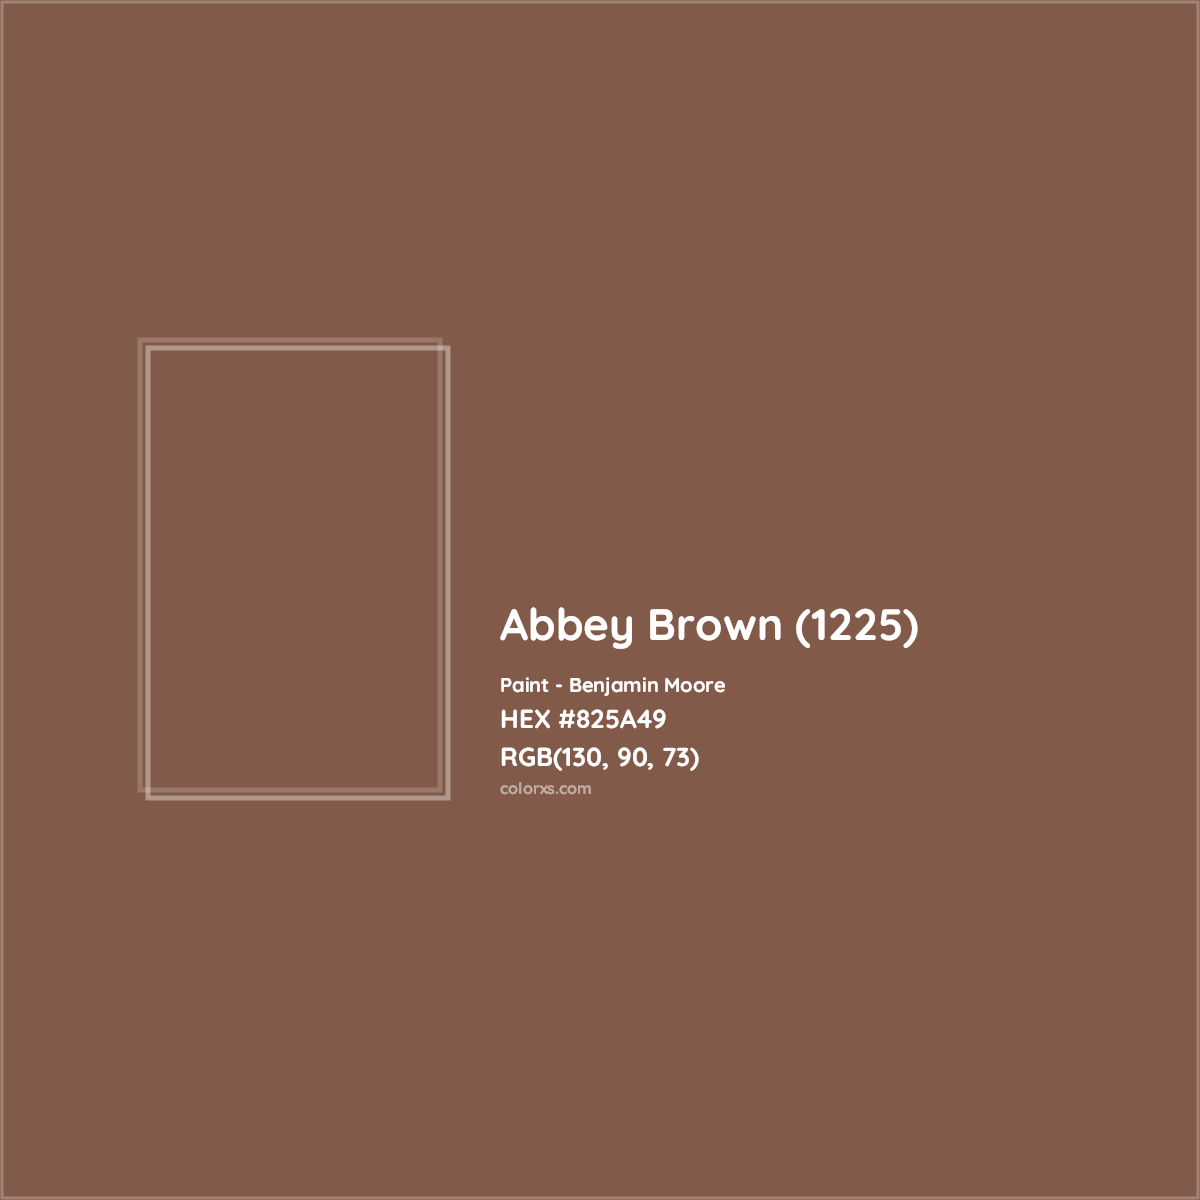 HEX #825A49 Abbey Brown (1225) Paint Benjamin Moore - Color Code